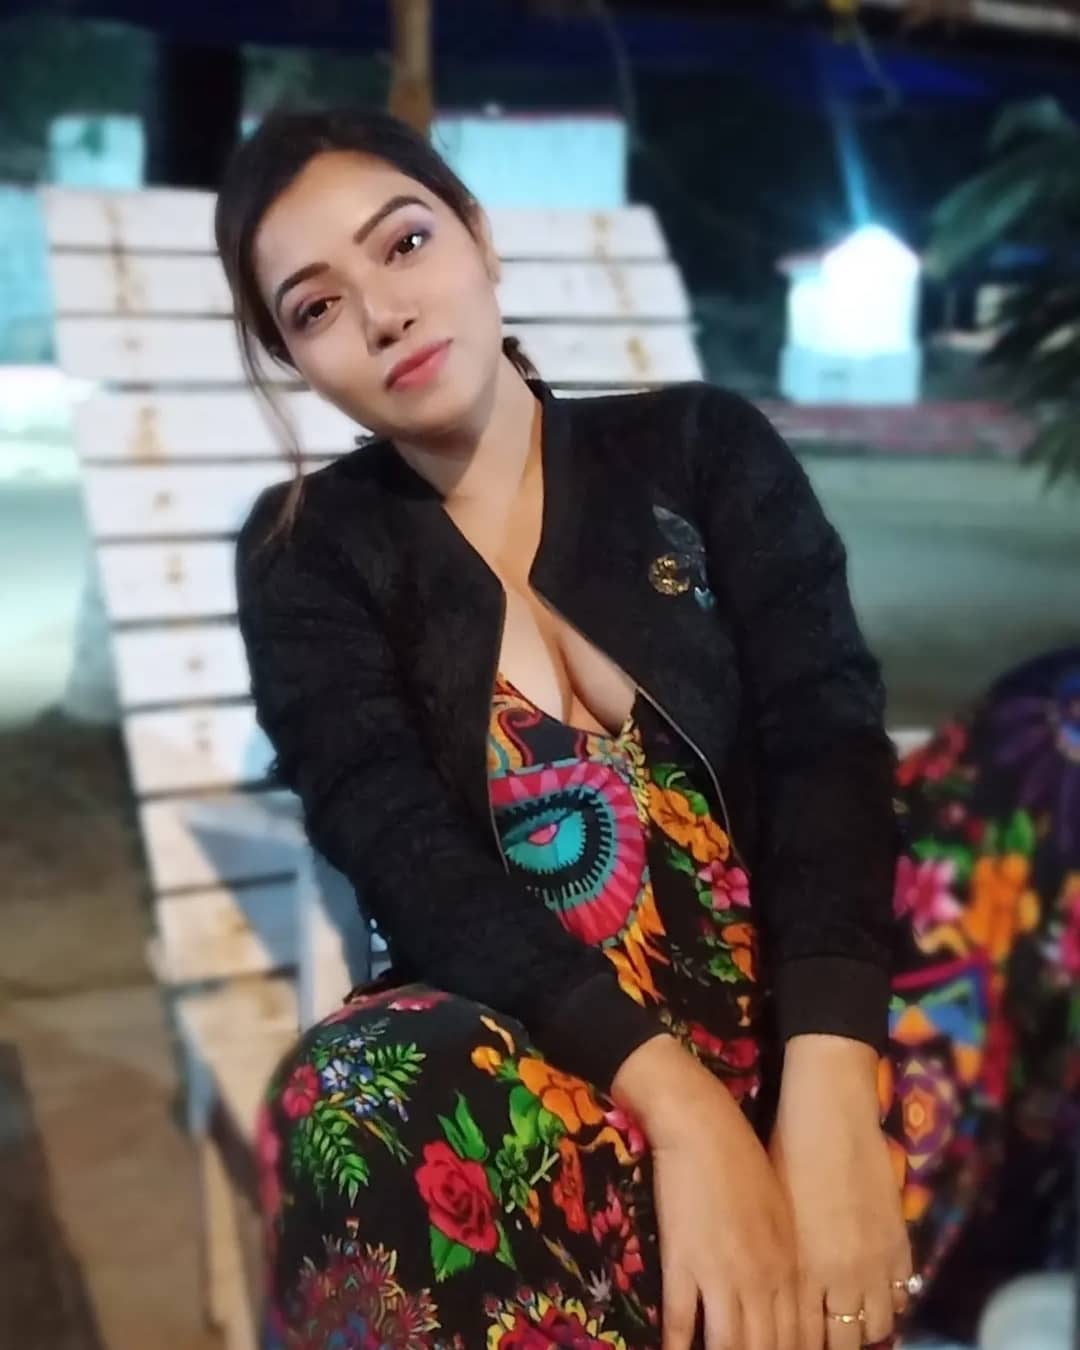 Rekha Mona in colorful dress and black jacket 